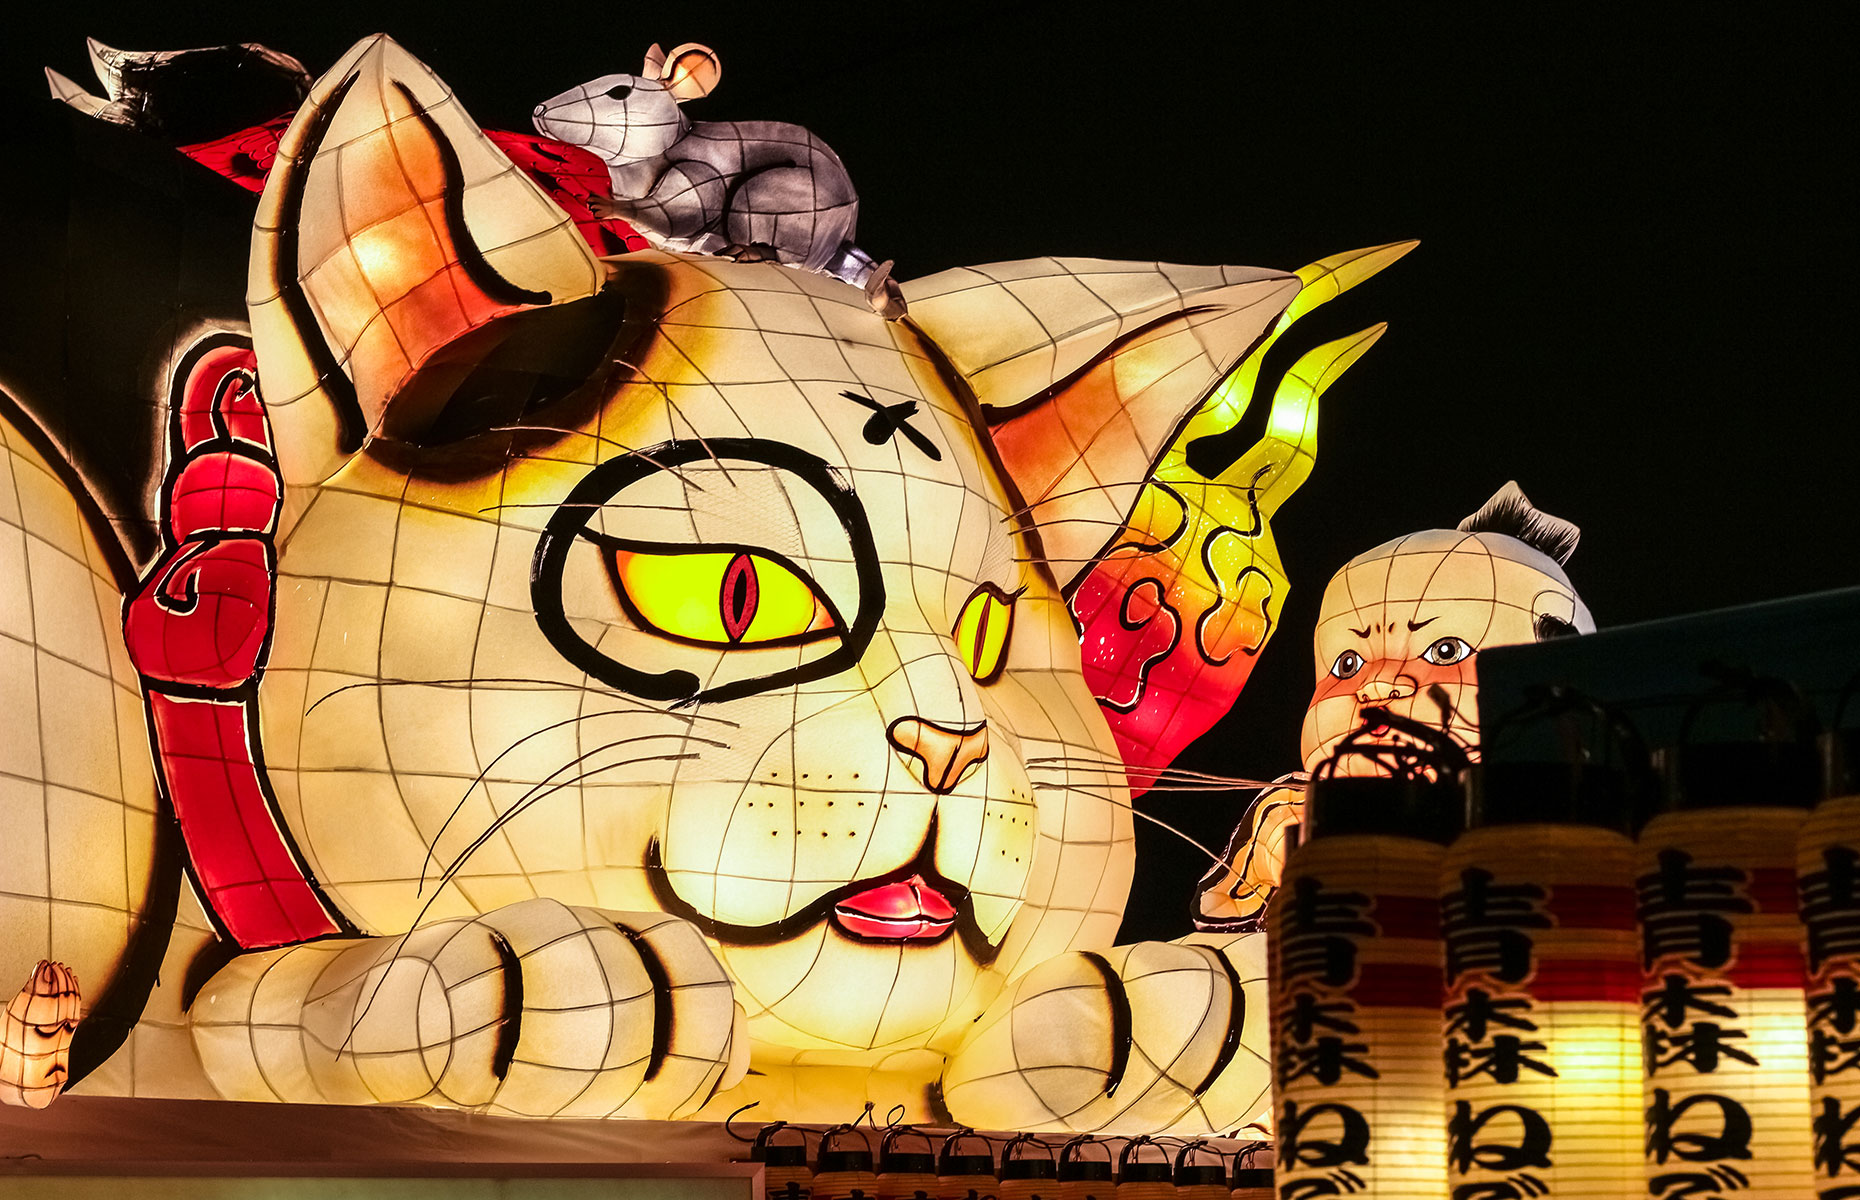 A cat lantern, with a mouse on top, at the Nebuta festival